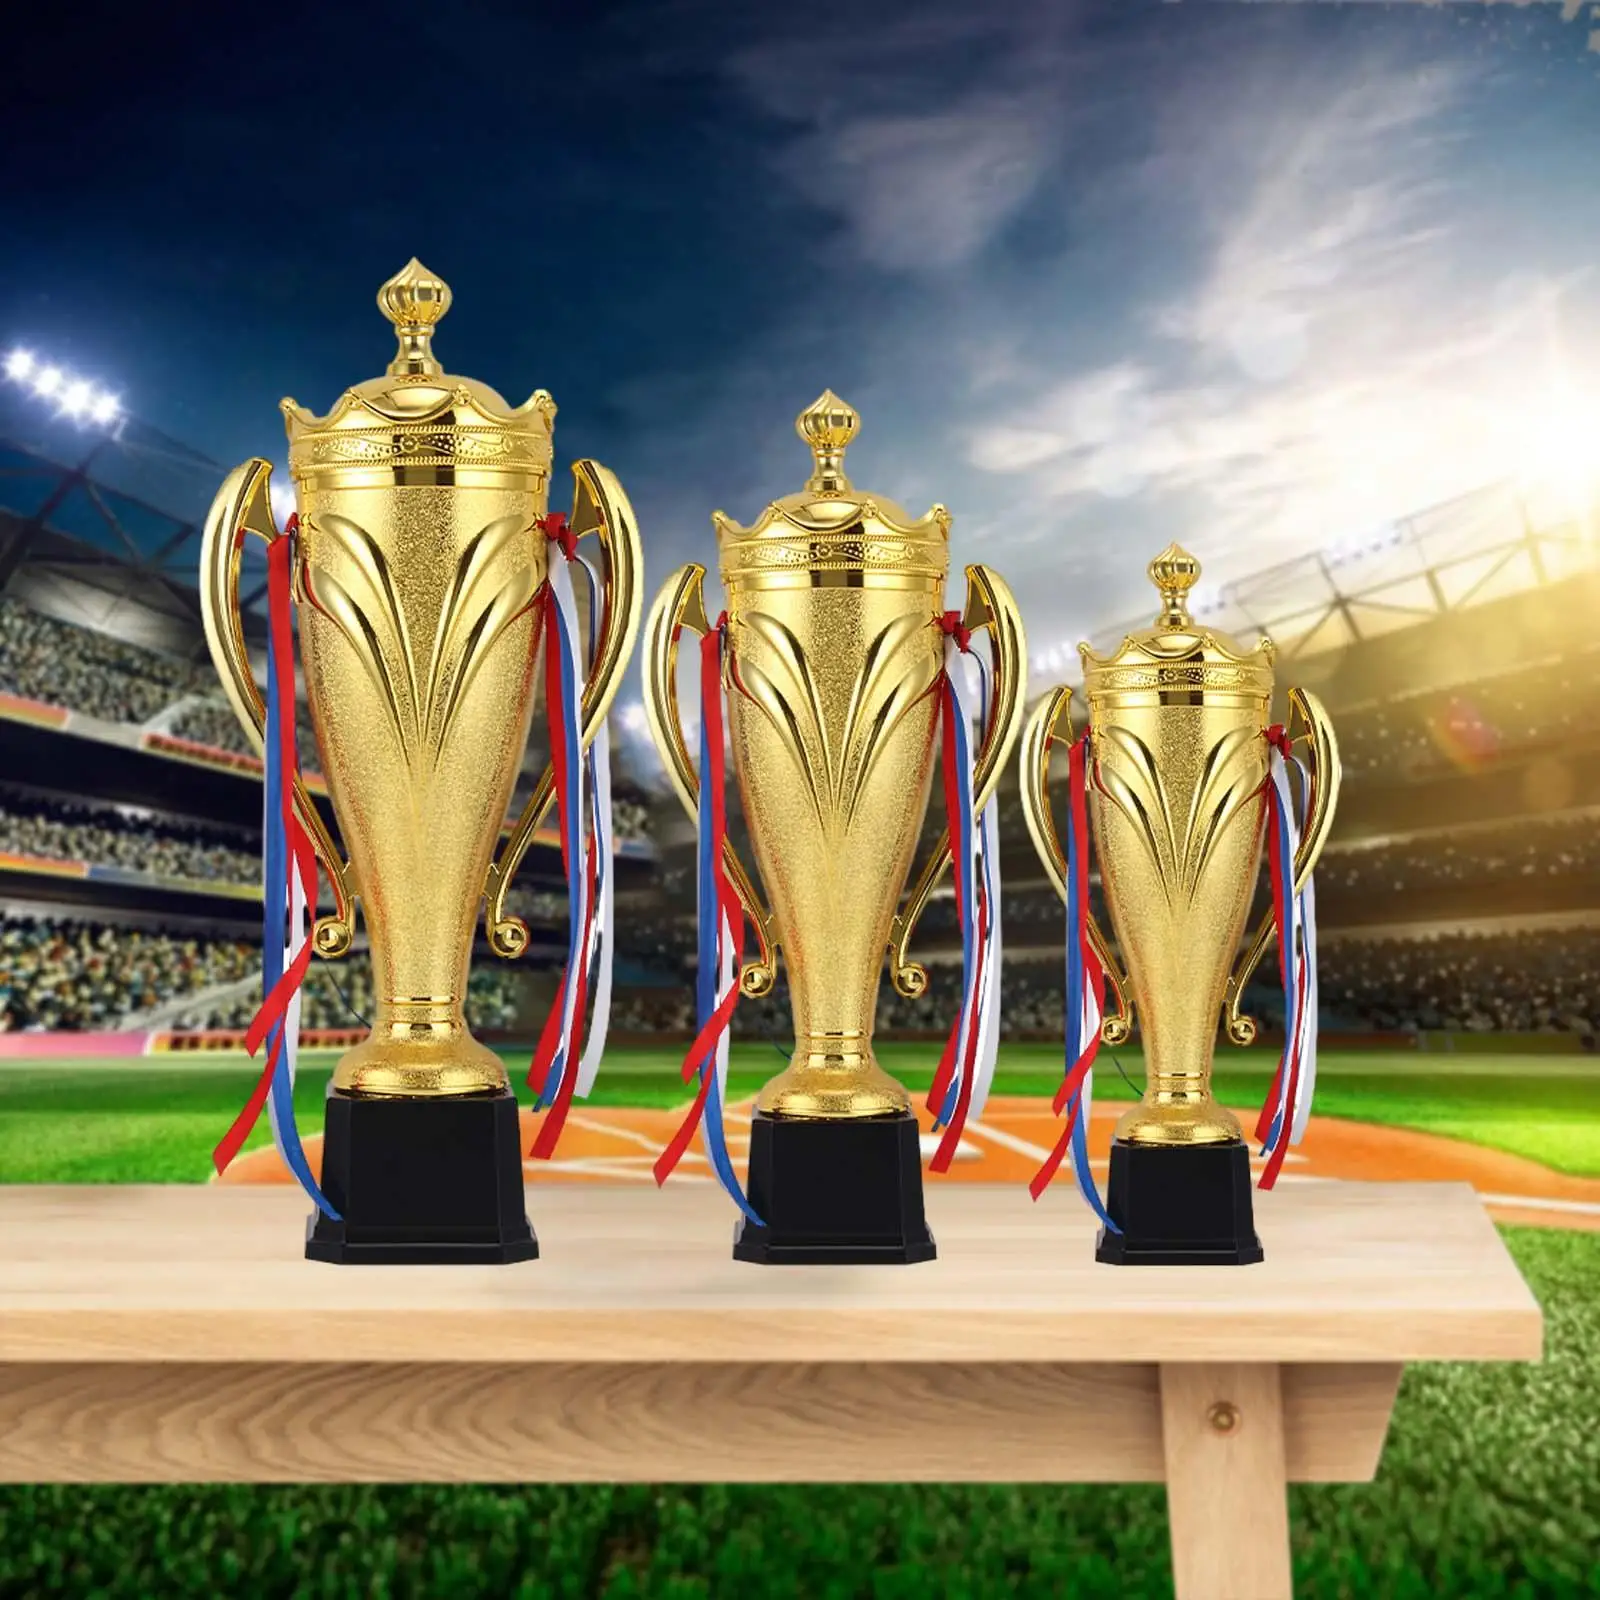 Child Trophy Cups PP Award Trophies Cup Rewards Prizes Exquisite Workmanship Multipurpose Decorative for Displaying Birthdays